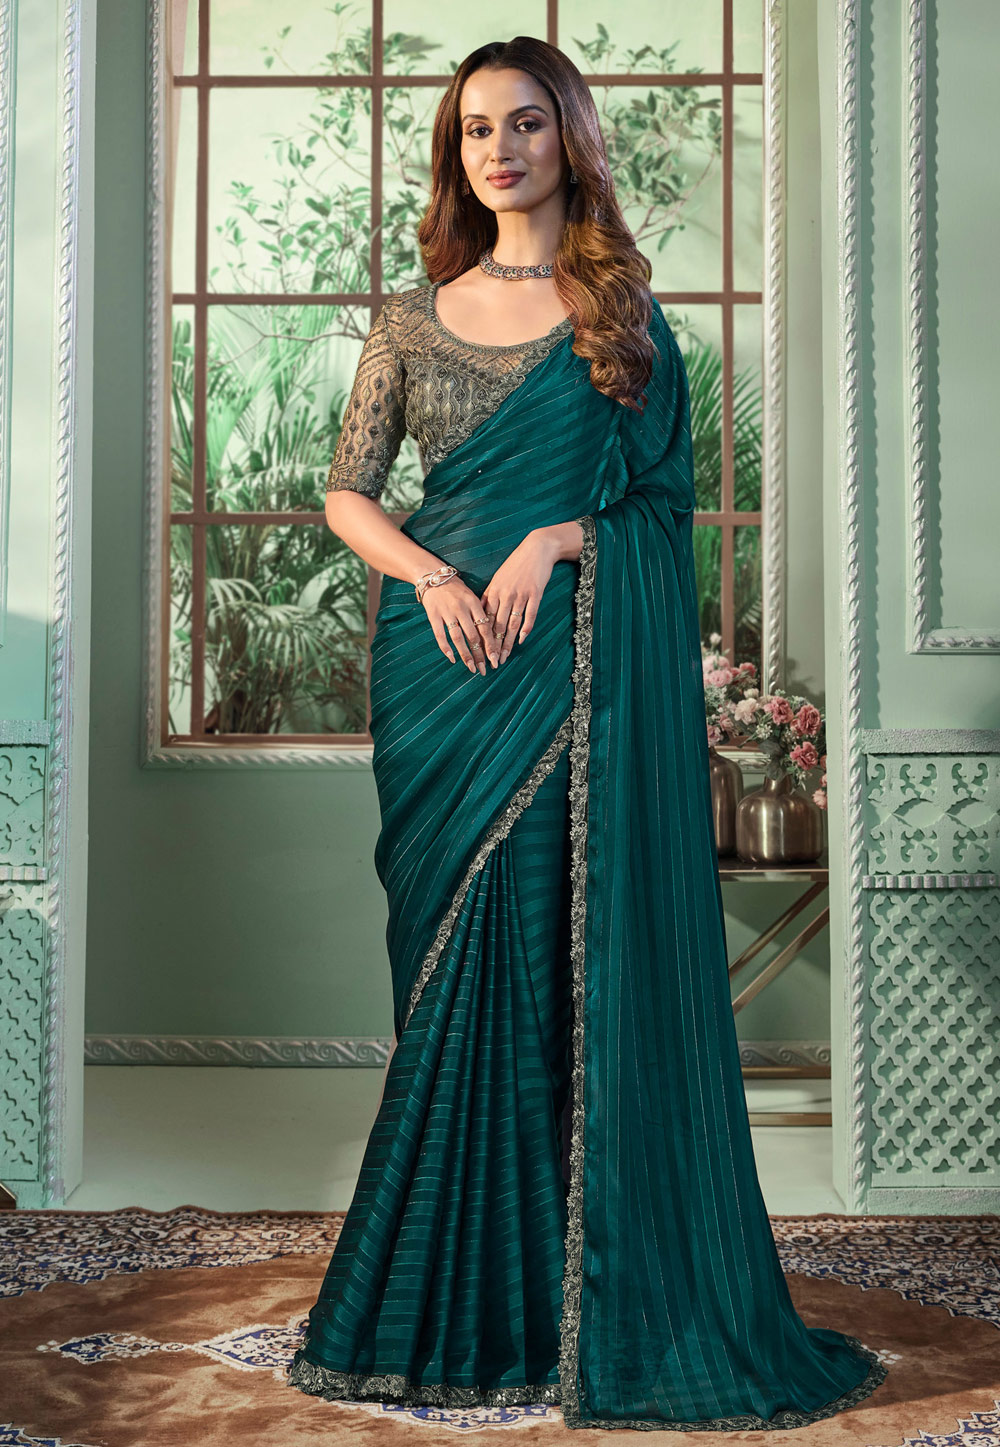 Teal Georgette Saree With Blouse 287250